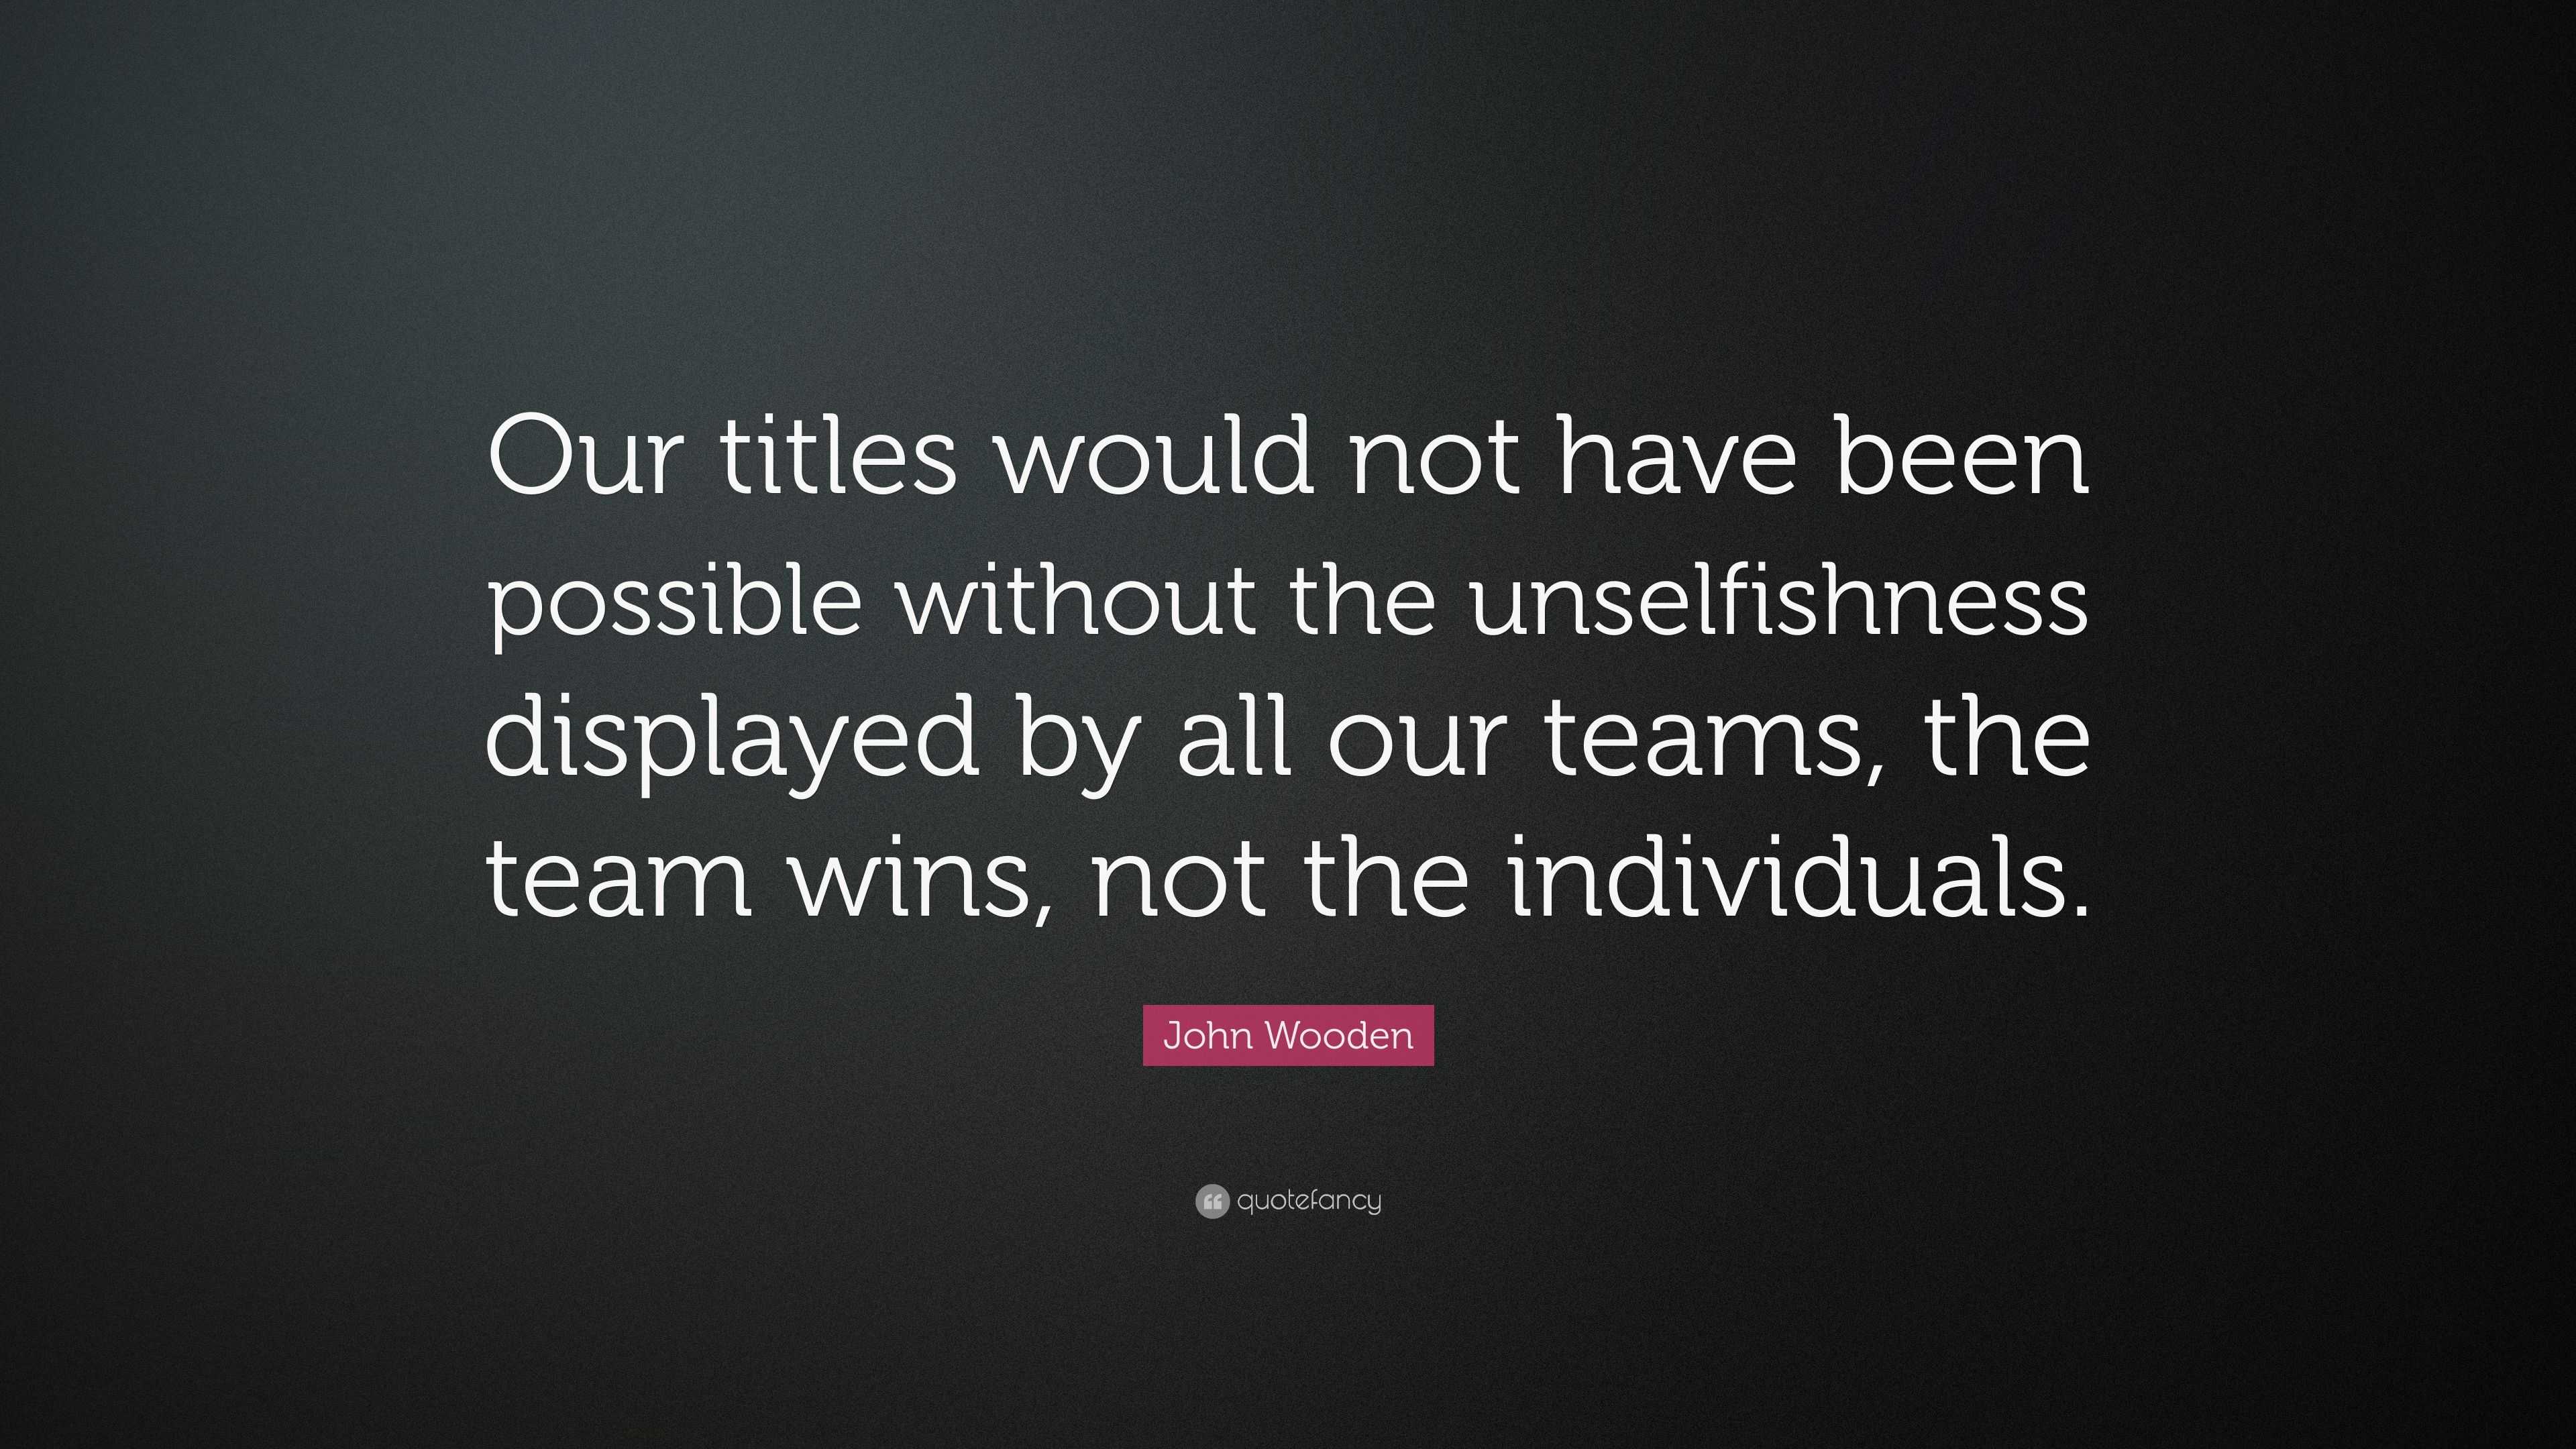 John Wooden Quote: “Our titles would not have been possible without the ...